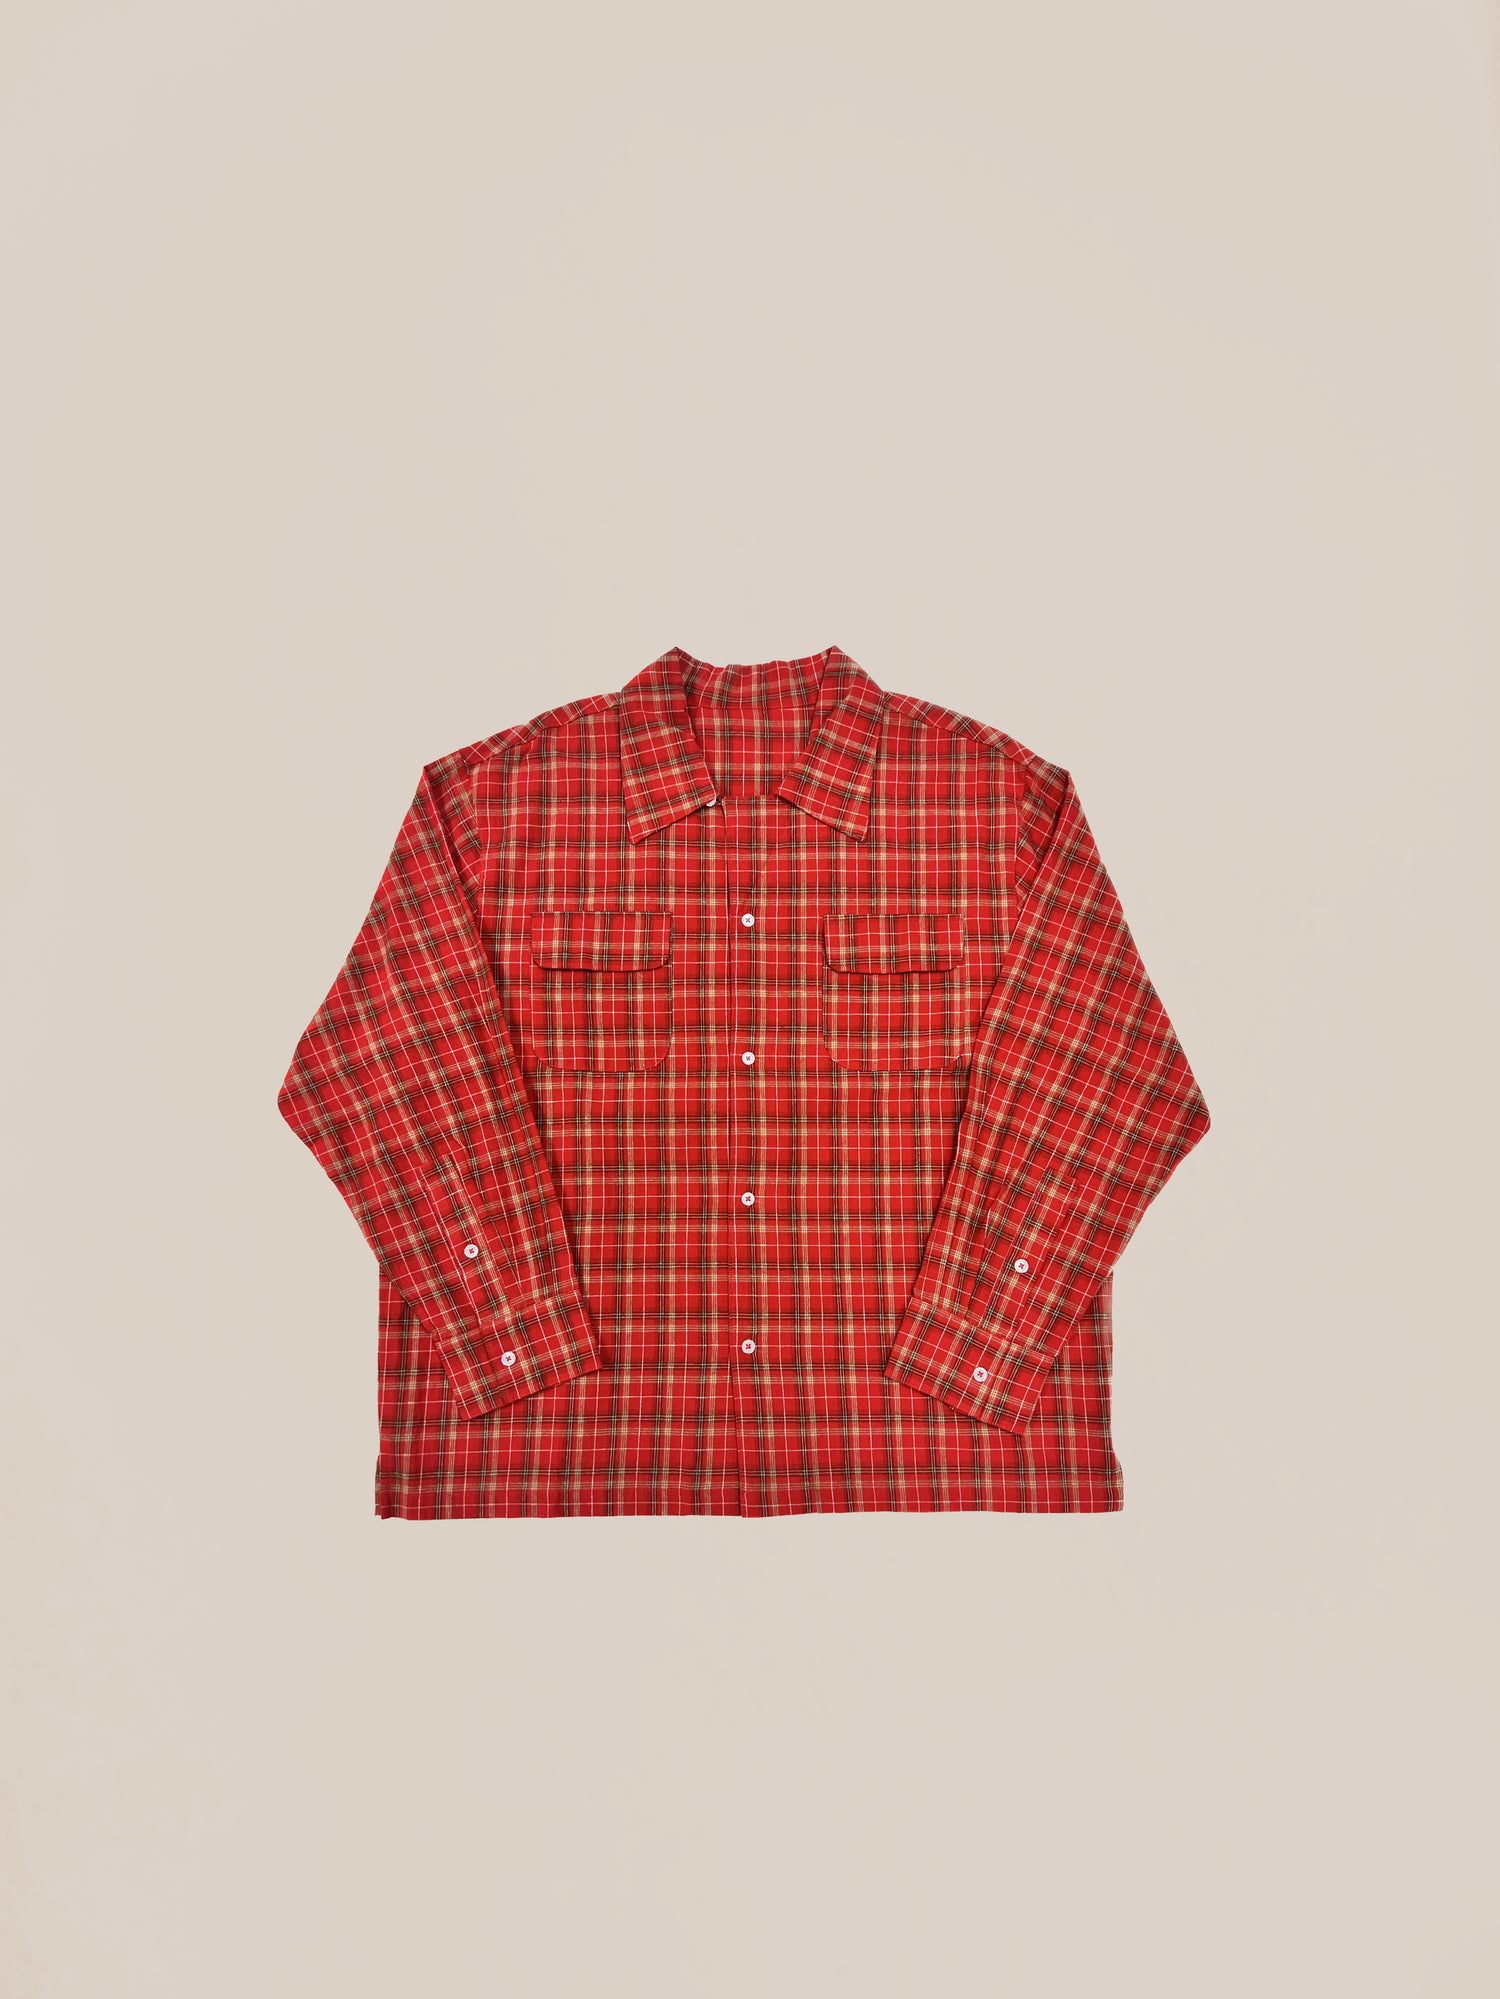 Sample 49 (Red Multi Flannel Button Down) shirt by Profound displayed on a plain background.